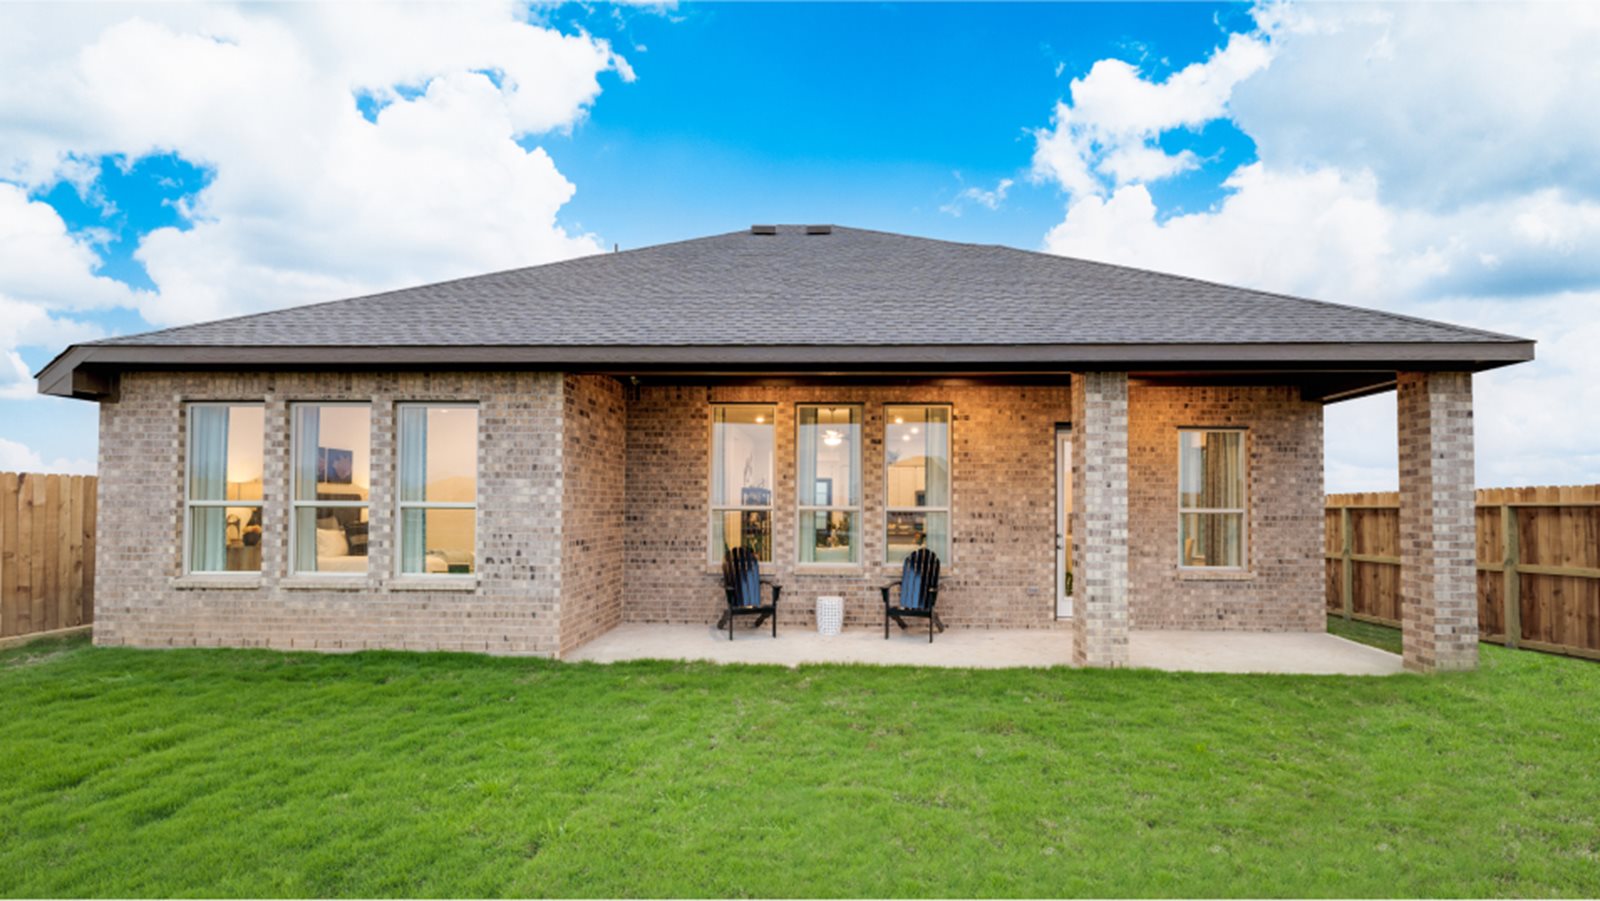 Photo of the exterior and backyard of the Cabot model home by Lennar Homes in Harvest Green in Richmond, Texas.